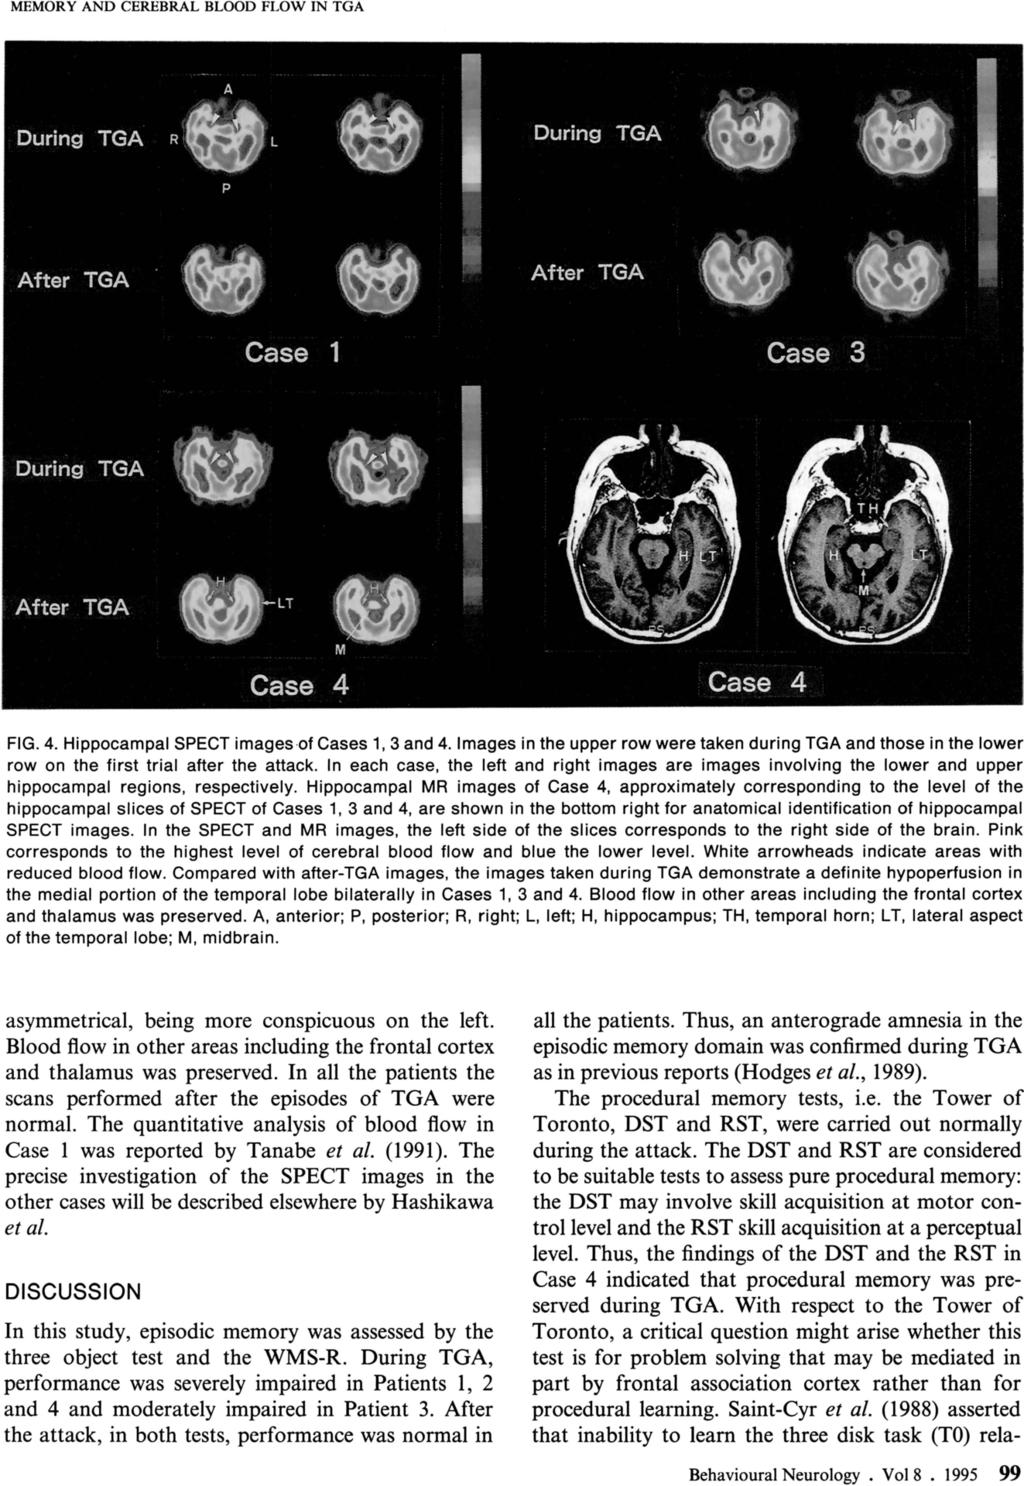 MEMORY AND CEREBRAL BLOOD FLOW IN TGA FIG. 4. Hippocampal SPECT images of Cases 1, 3 and 4.